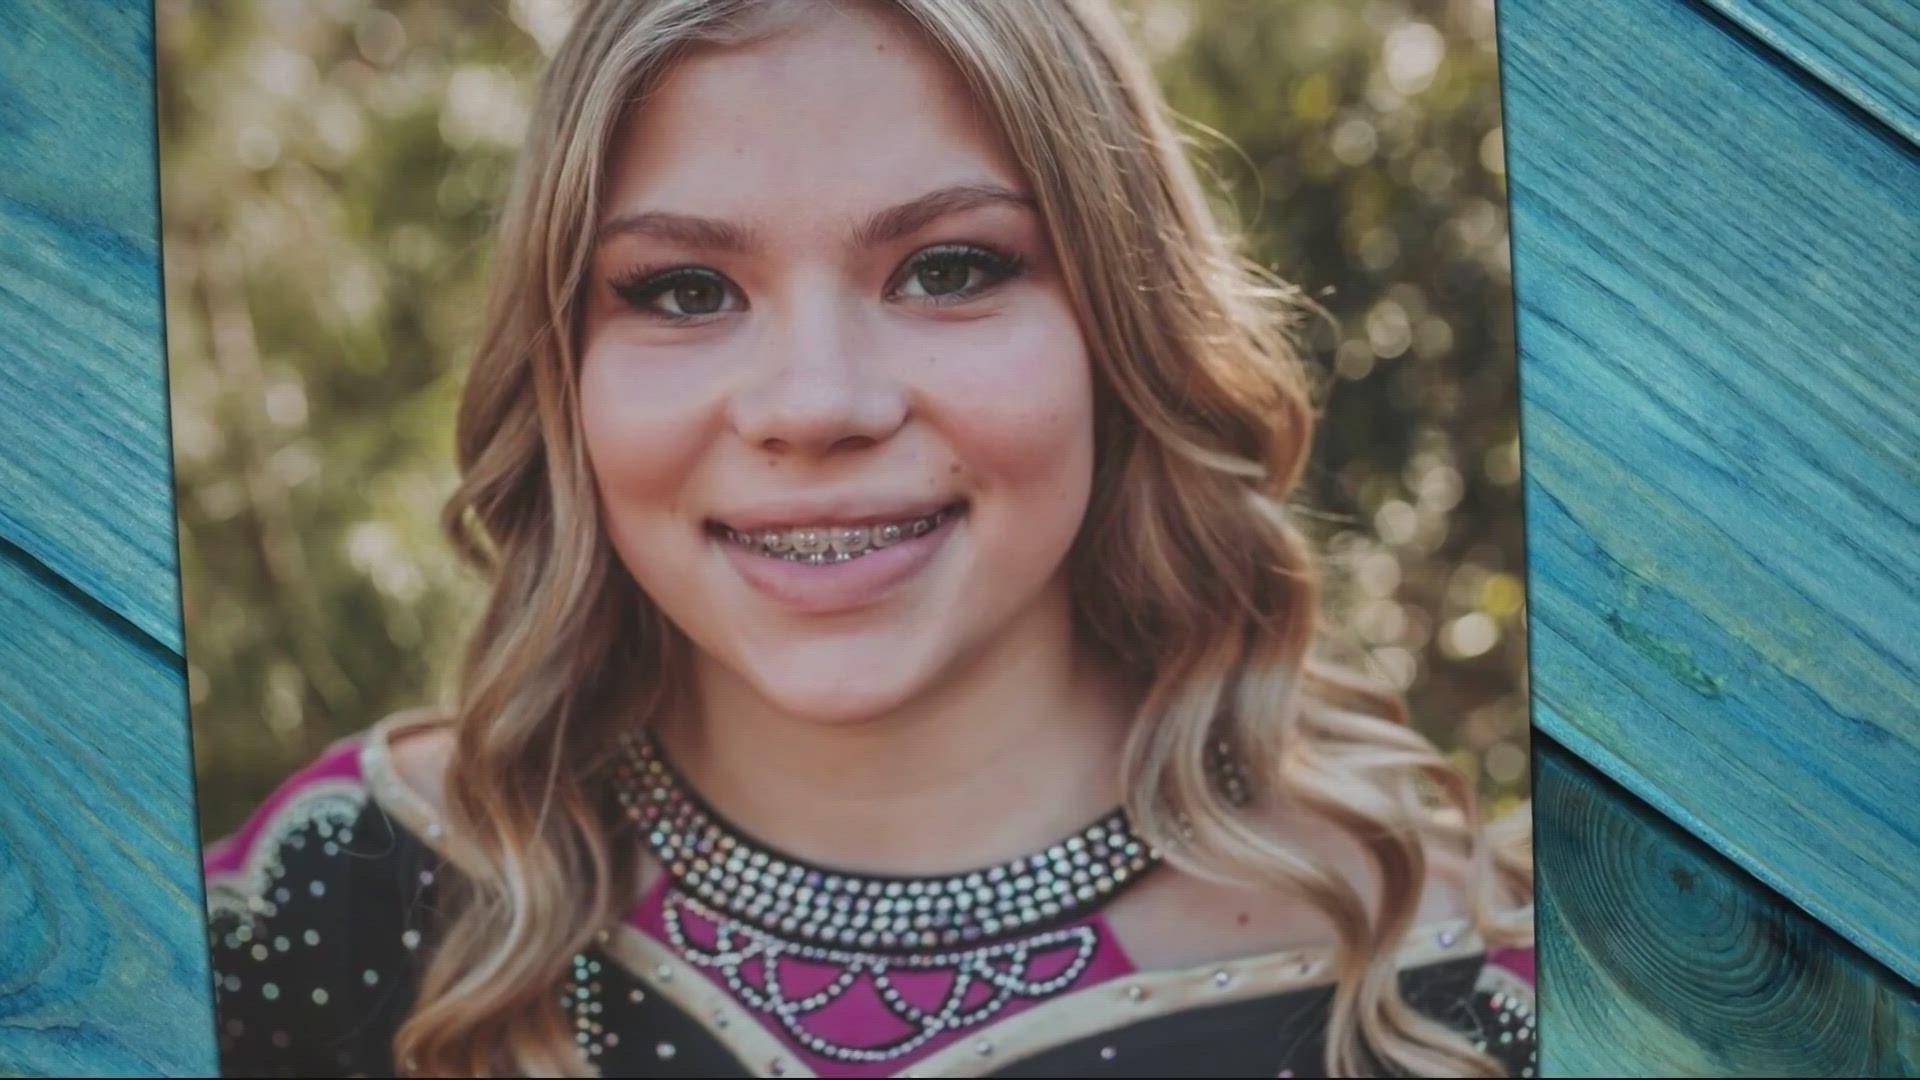 Tristyn Bailey, 13, was murdered on Mother's Day 2021. Now that her killer has been sentenced to life in prison, her parents are focused on carrying on her legacy.